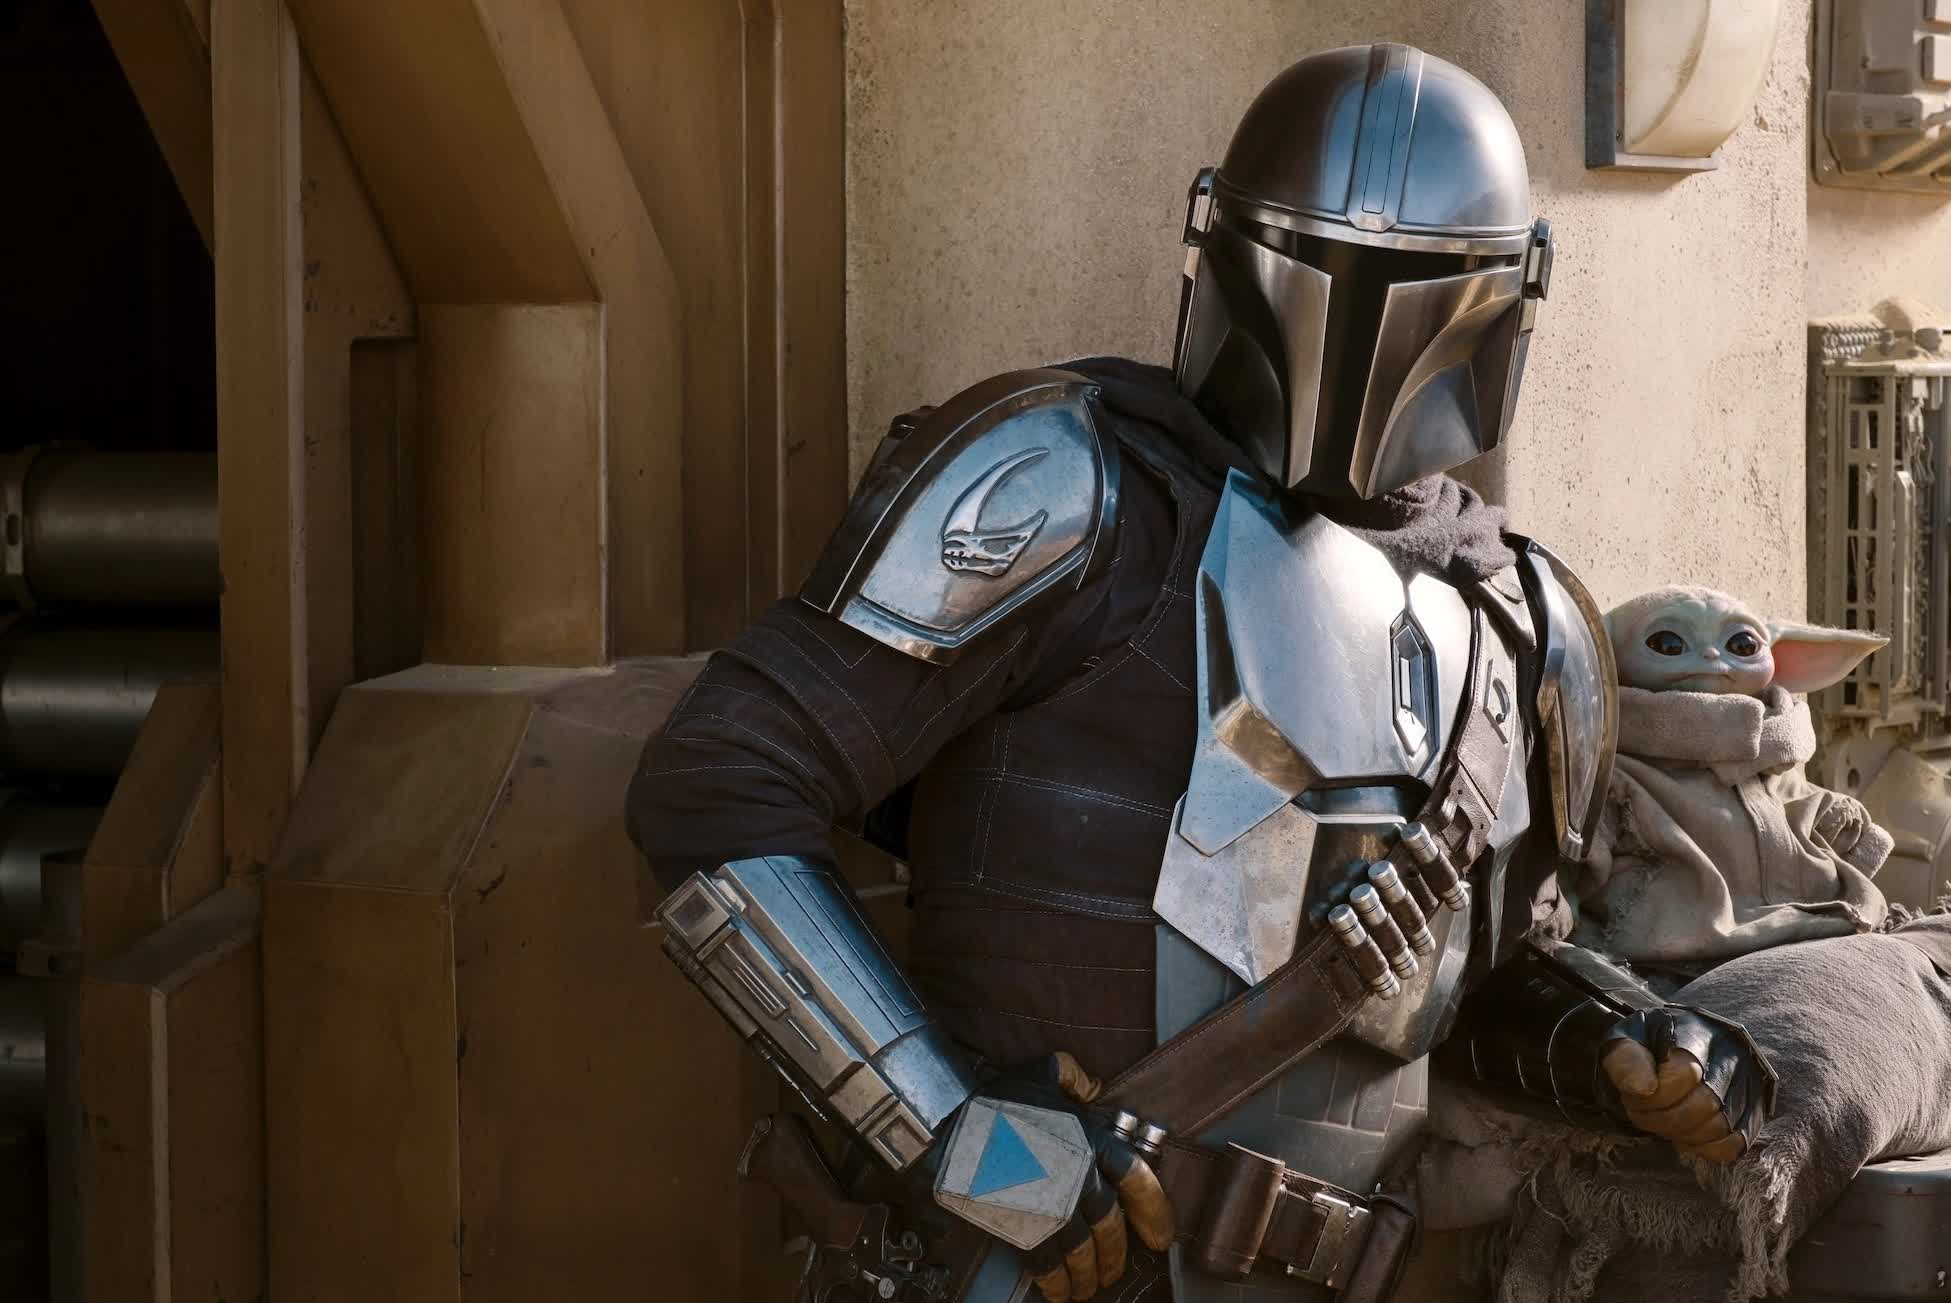 Watch the first episode of The Mandalorian on broadcast TV later this month